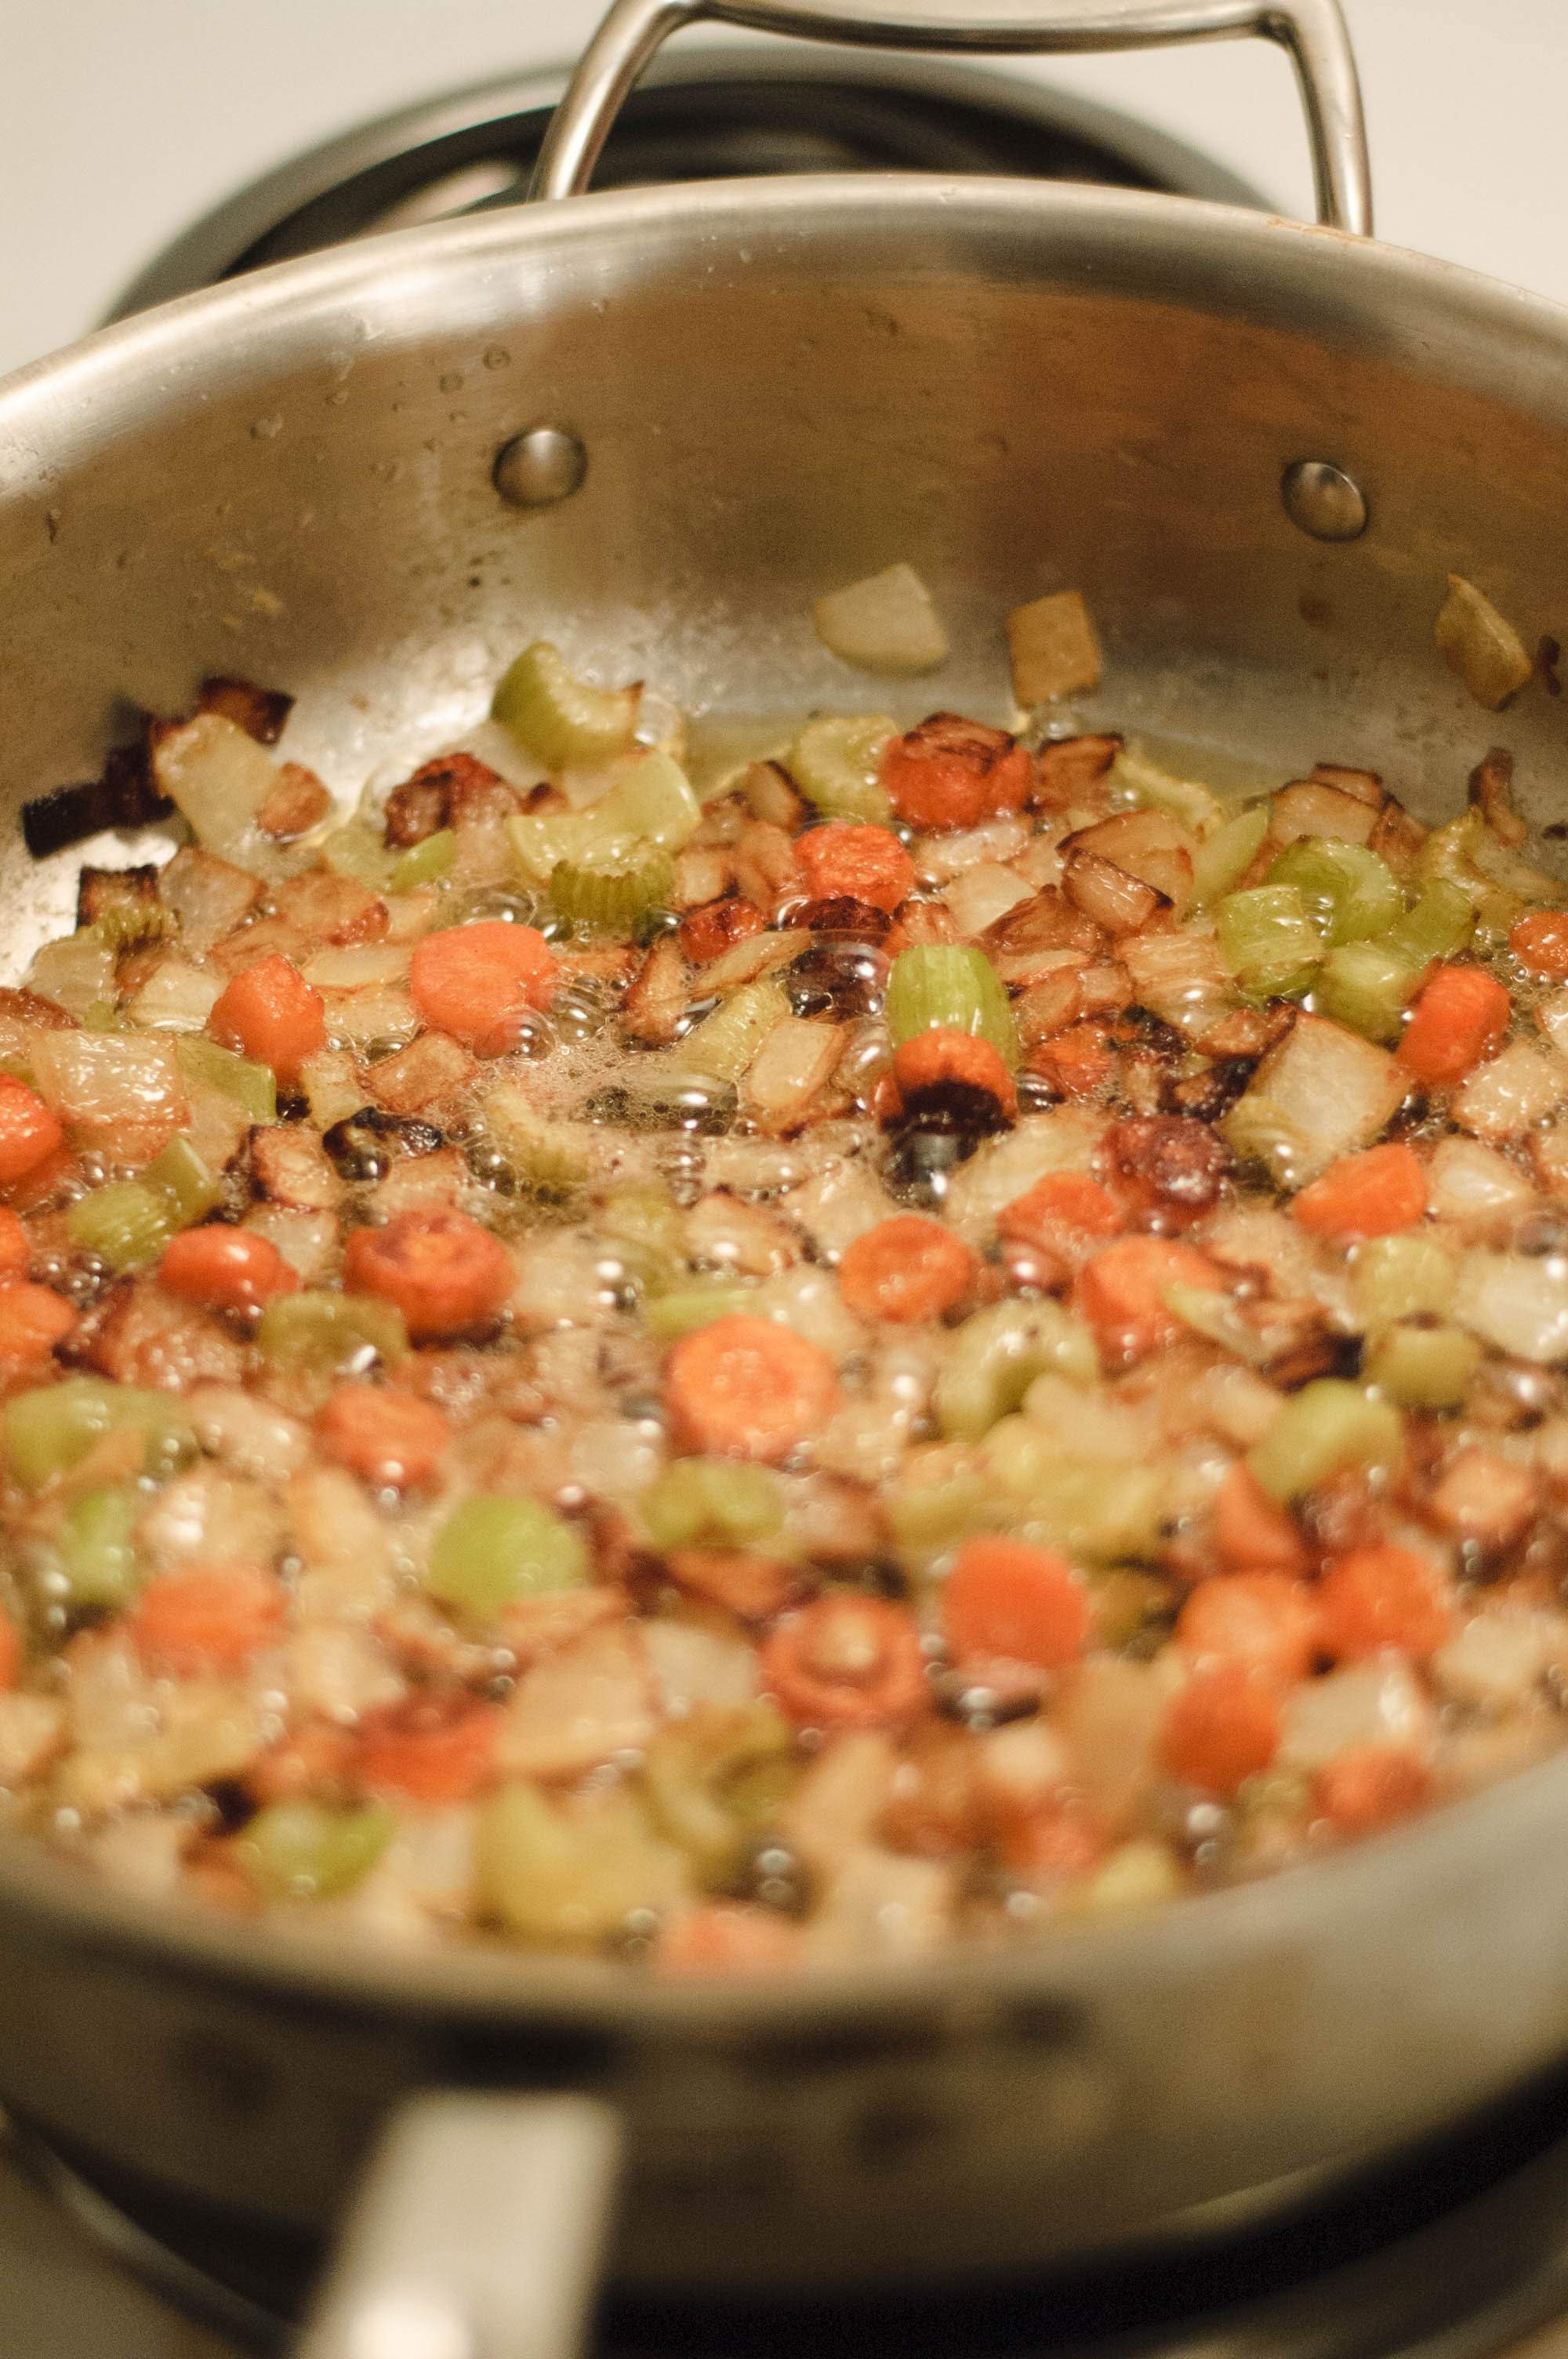 Browned mirepoix in a sauce pot preparing for espagnole sauce.